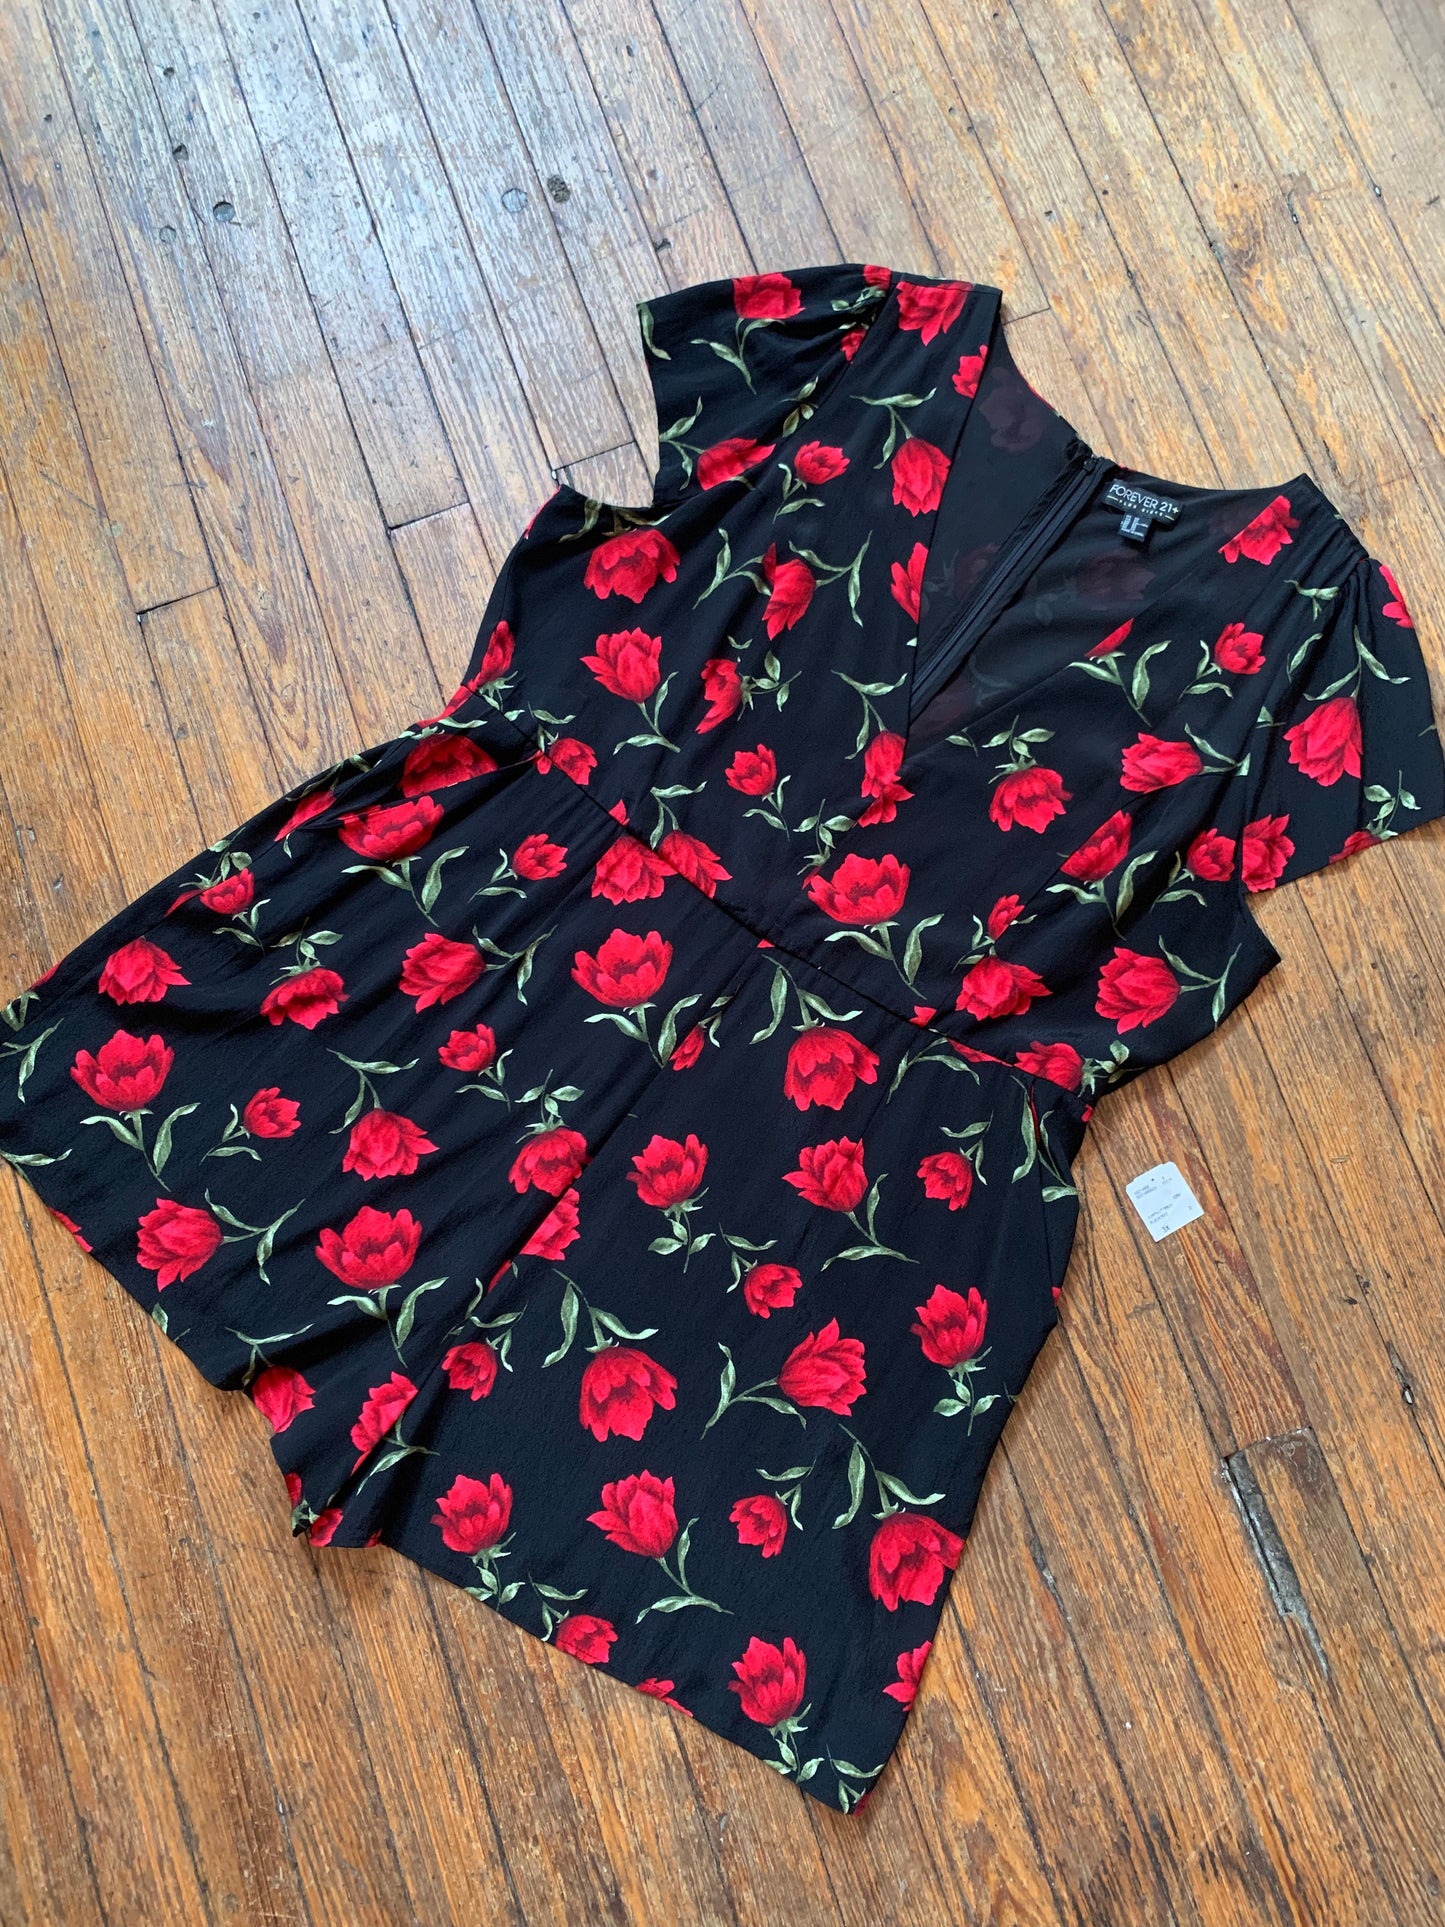 NWT Plus Size Black and Red Floral Romper